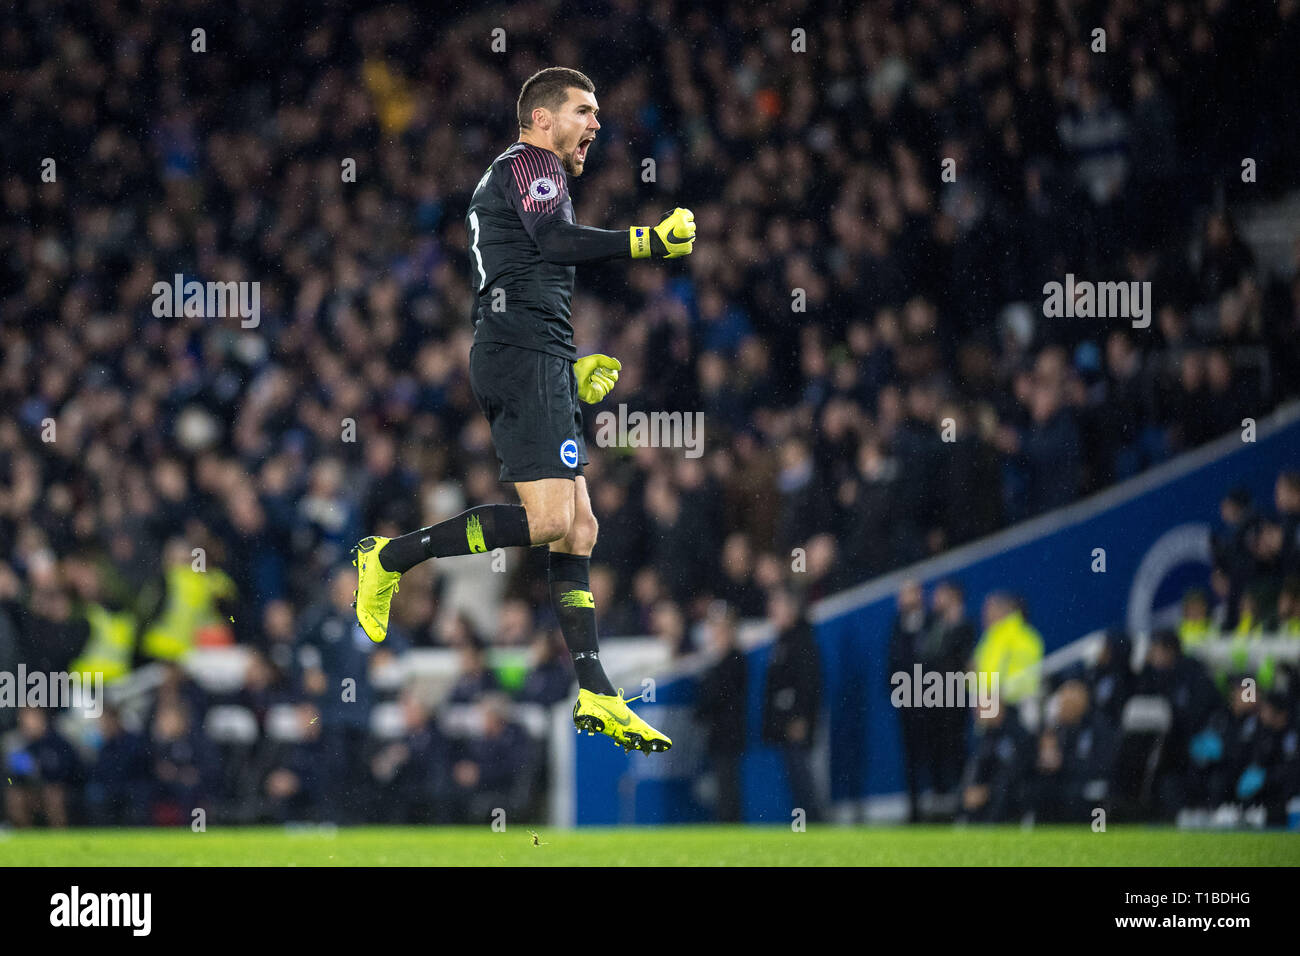 BRIGHTON, ENGLAND - DECEMBER 04: Mathew Ryan of  Brighton & Hove Albion celebrate he's team 1st goal during the Premier League match between Brighton & Hove Albion and Crystal Palace at American Express Community Stadium on December 4, 2018 in Brighton, United Kingdom. (Photo by Sebastian Frej/MB Media) Stock Photo